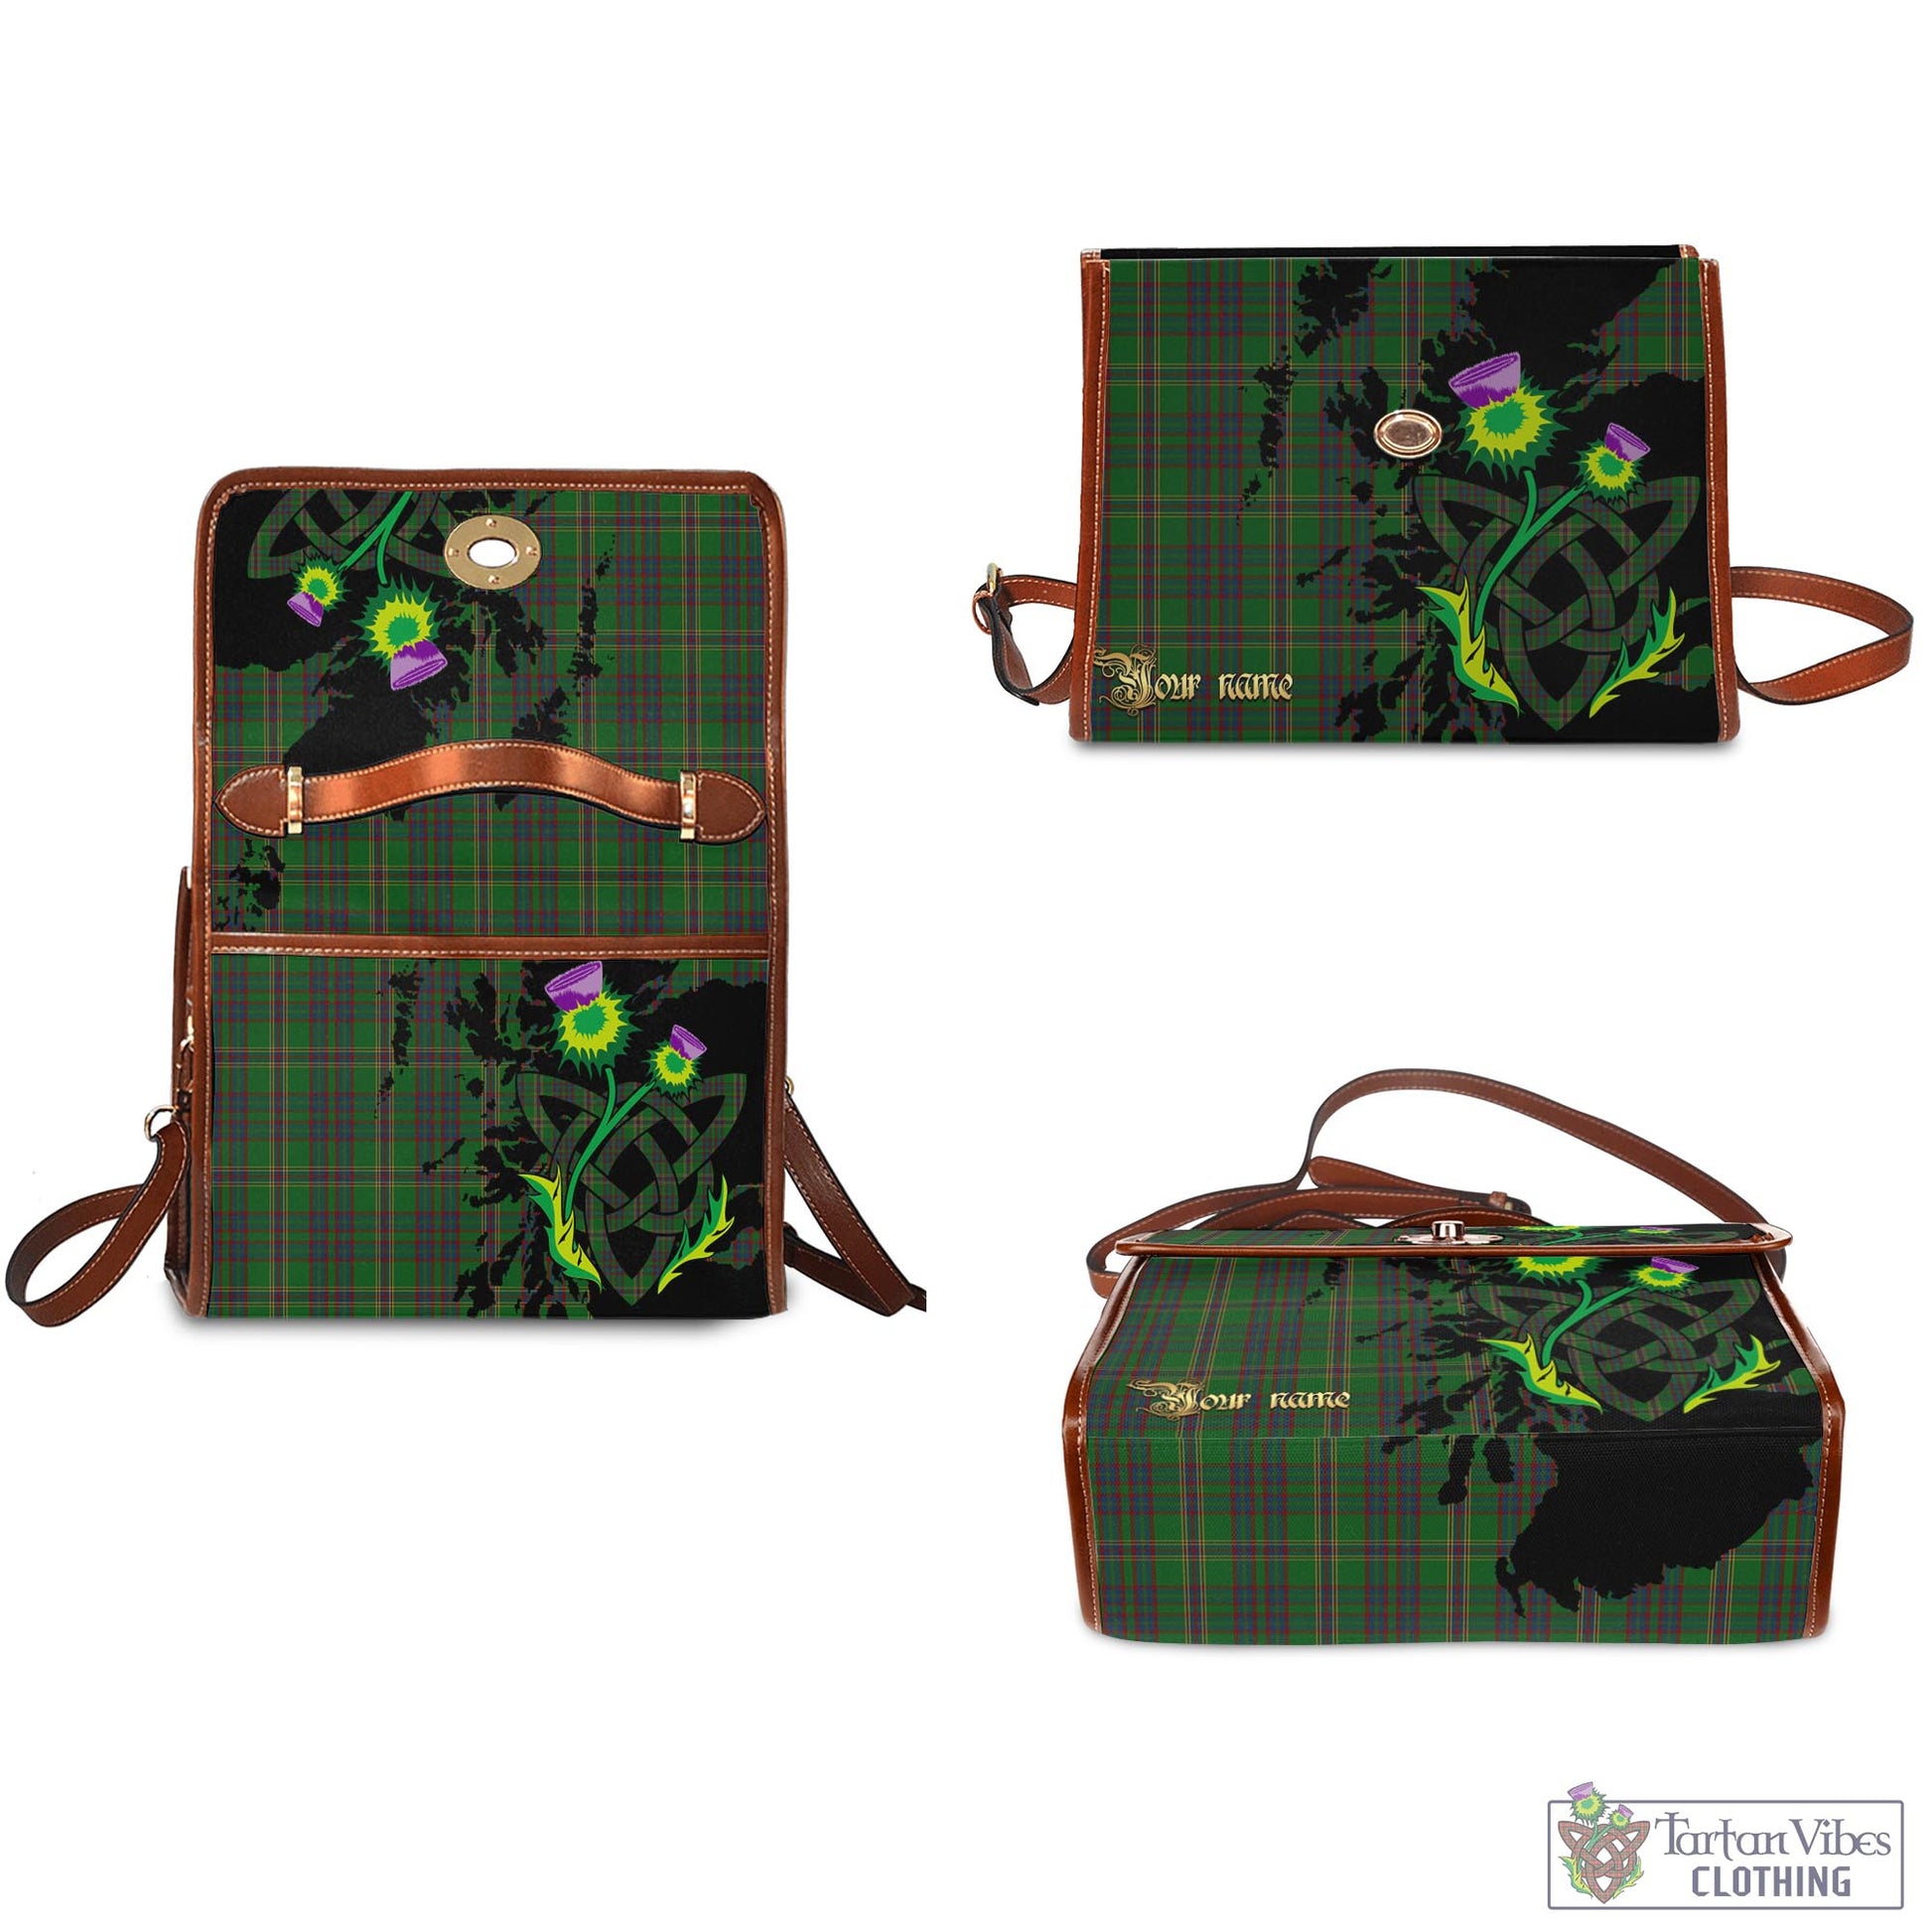 Tartan Vibes Clothing Westmeath County Ireland Tartan Waterproof Canvas Bag with Scotland Map and Thistle Celtic Accents